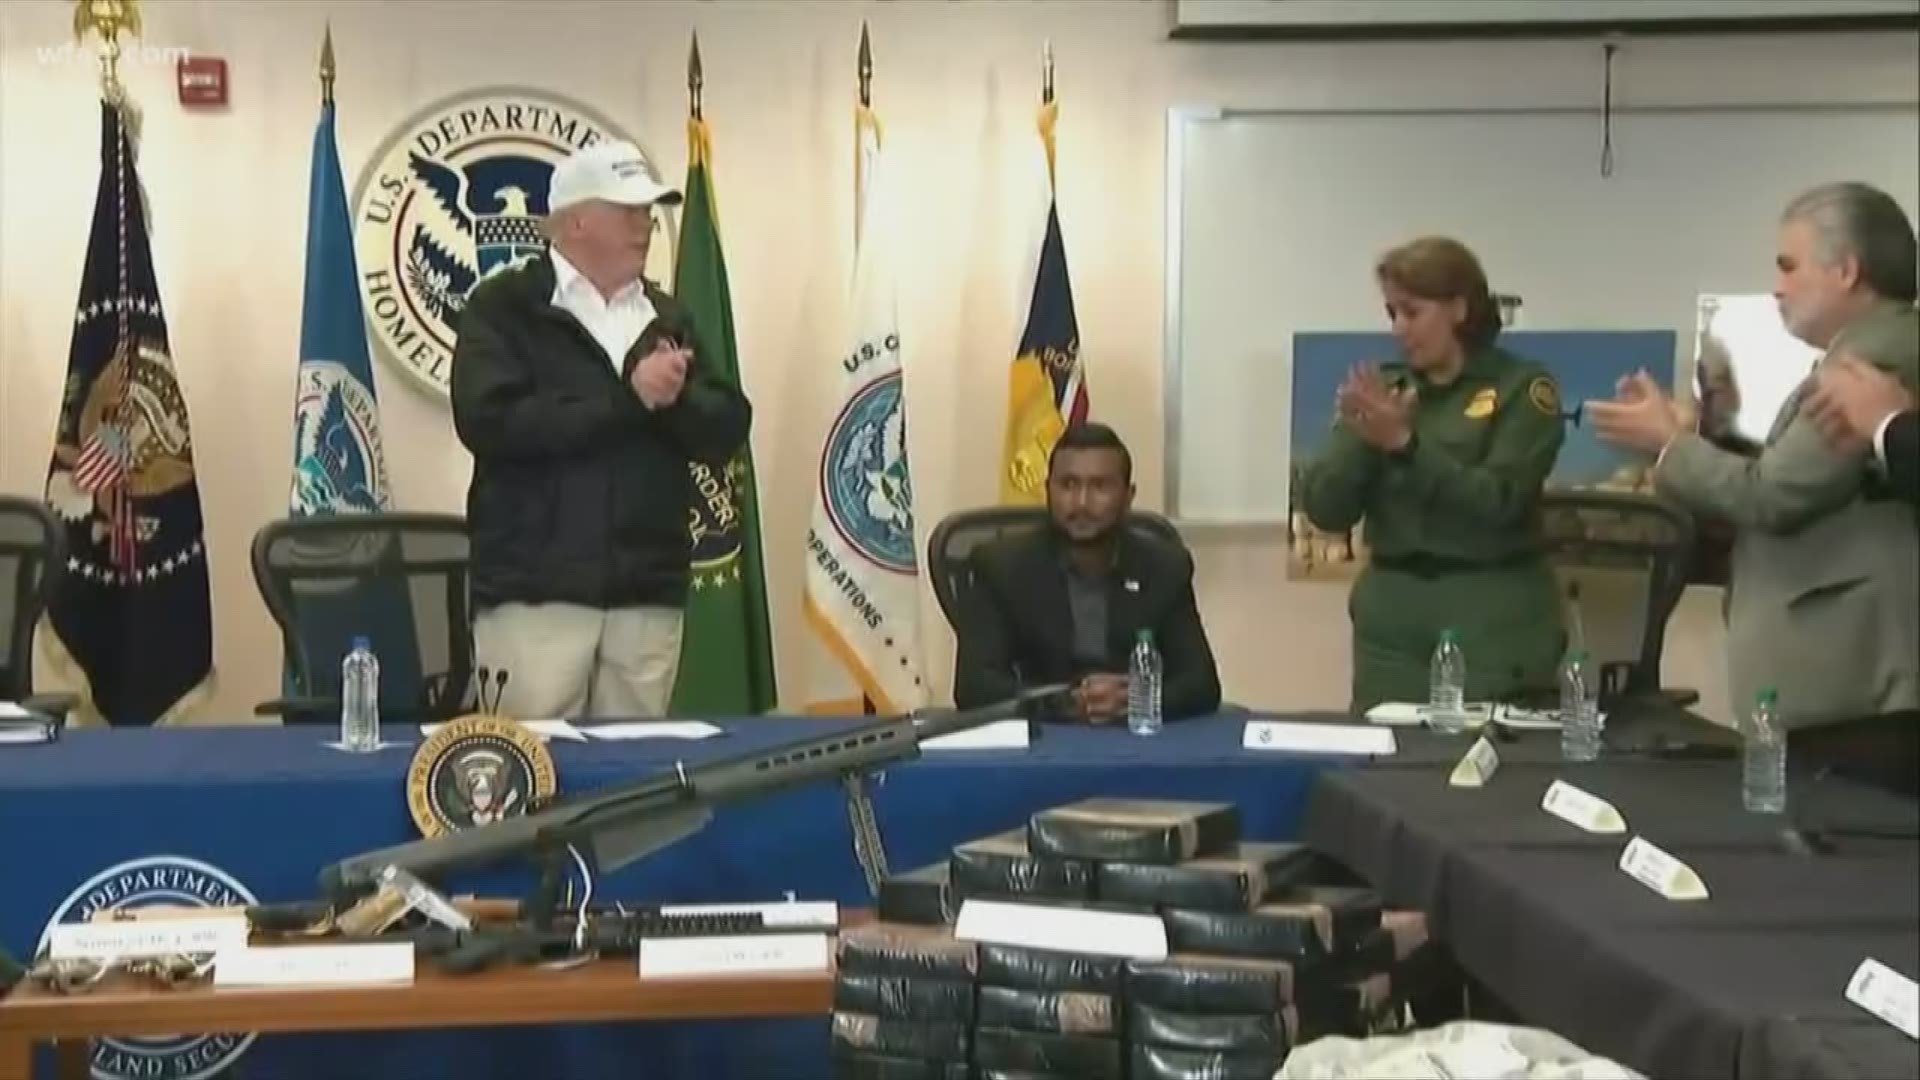 President Trump's first stop on his trip to the Texas was at a Border Patrol Station in McAllen, Texas.